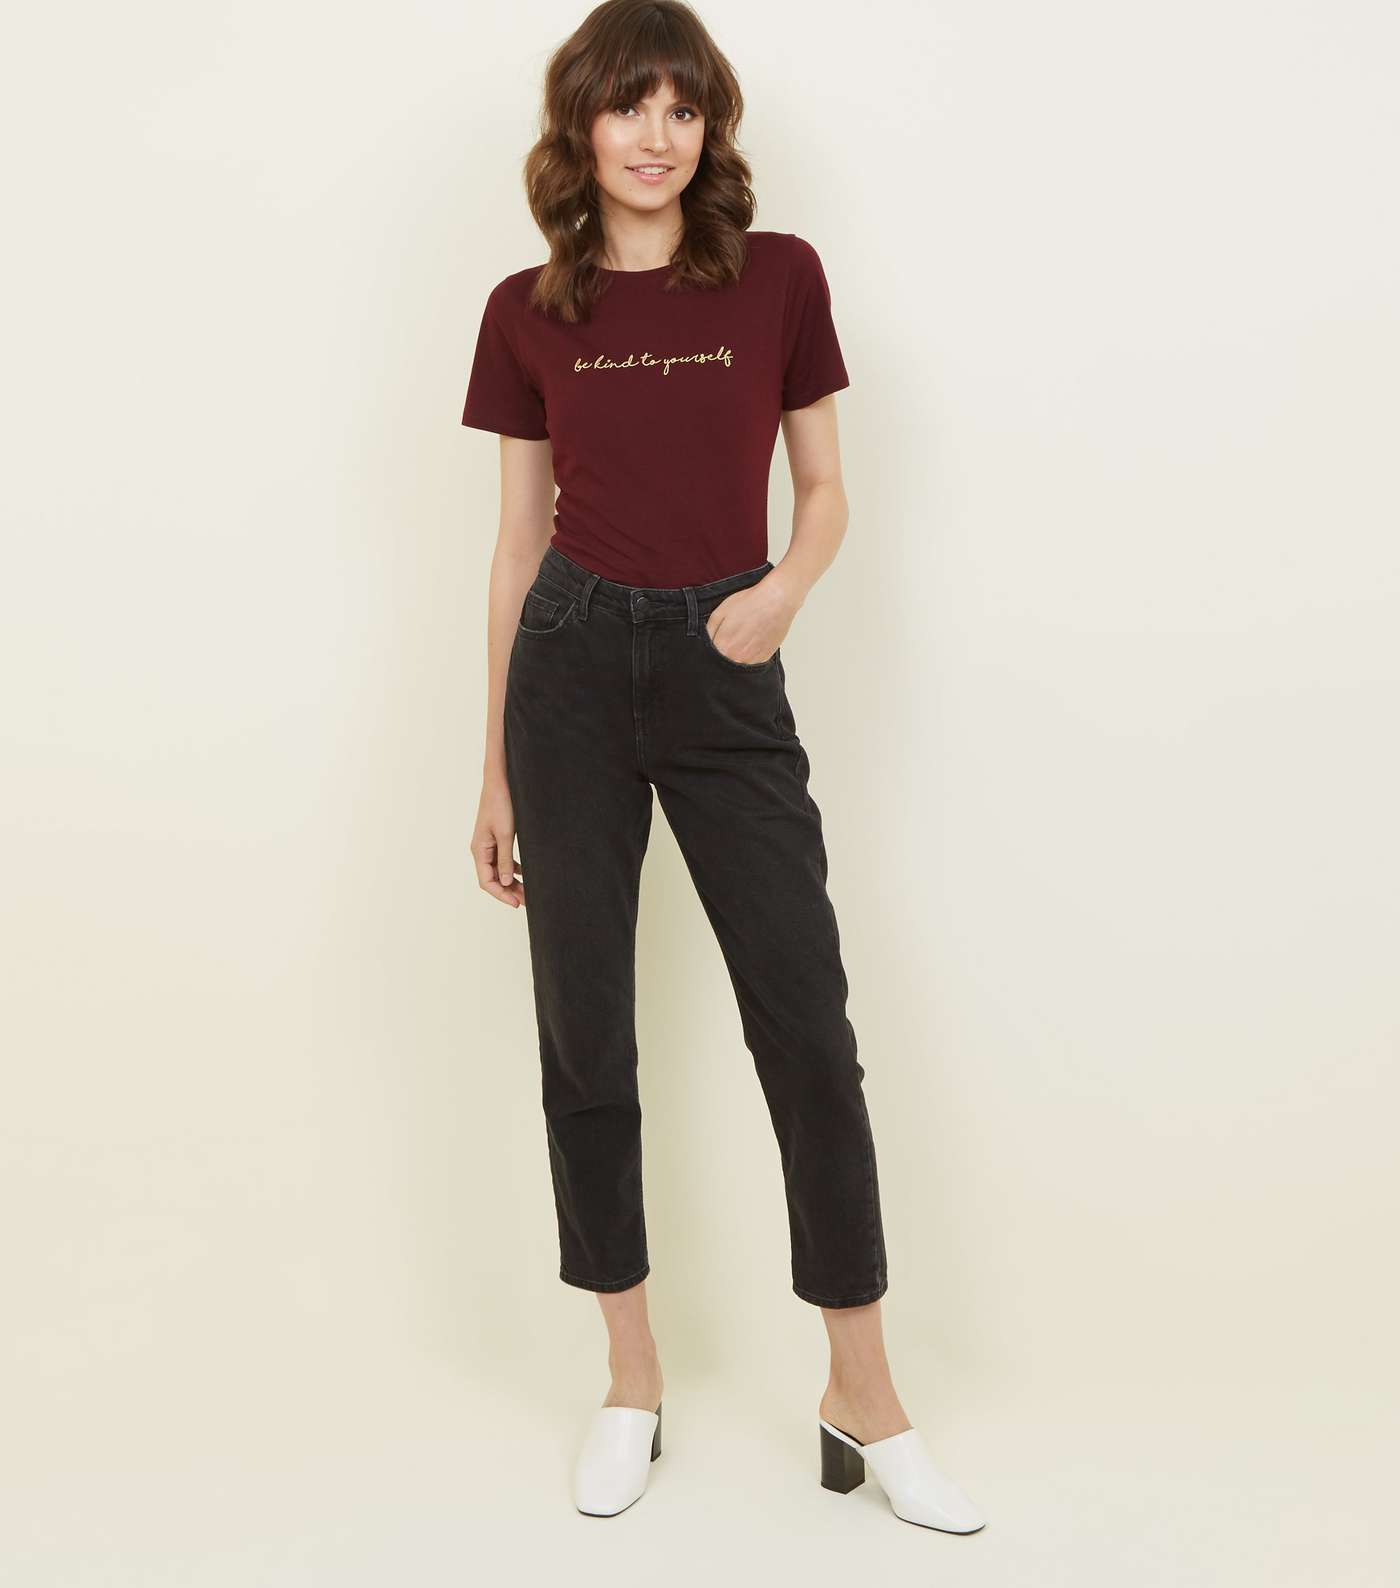 Burgundy Kind To Yourself Embroidered Slogan T-Shirt Image 2